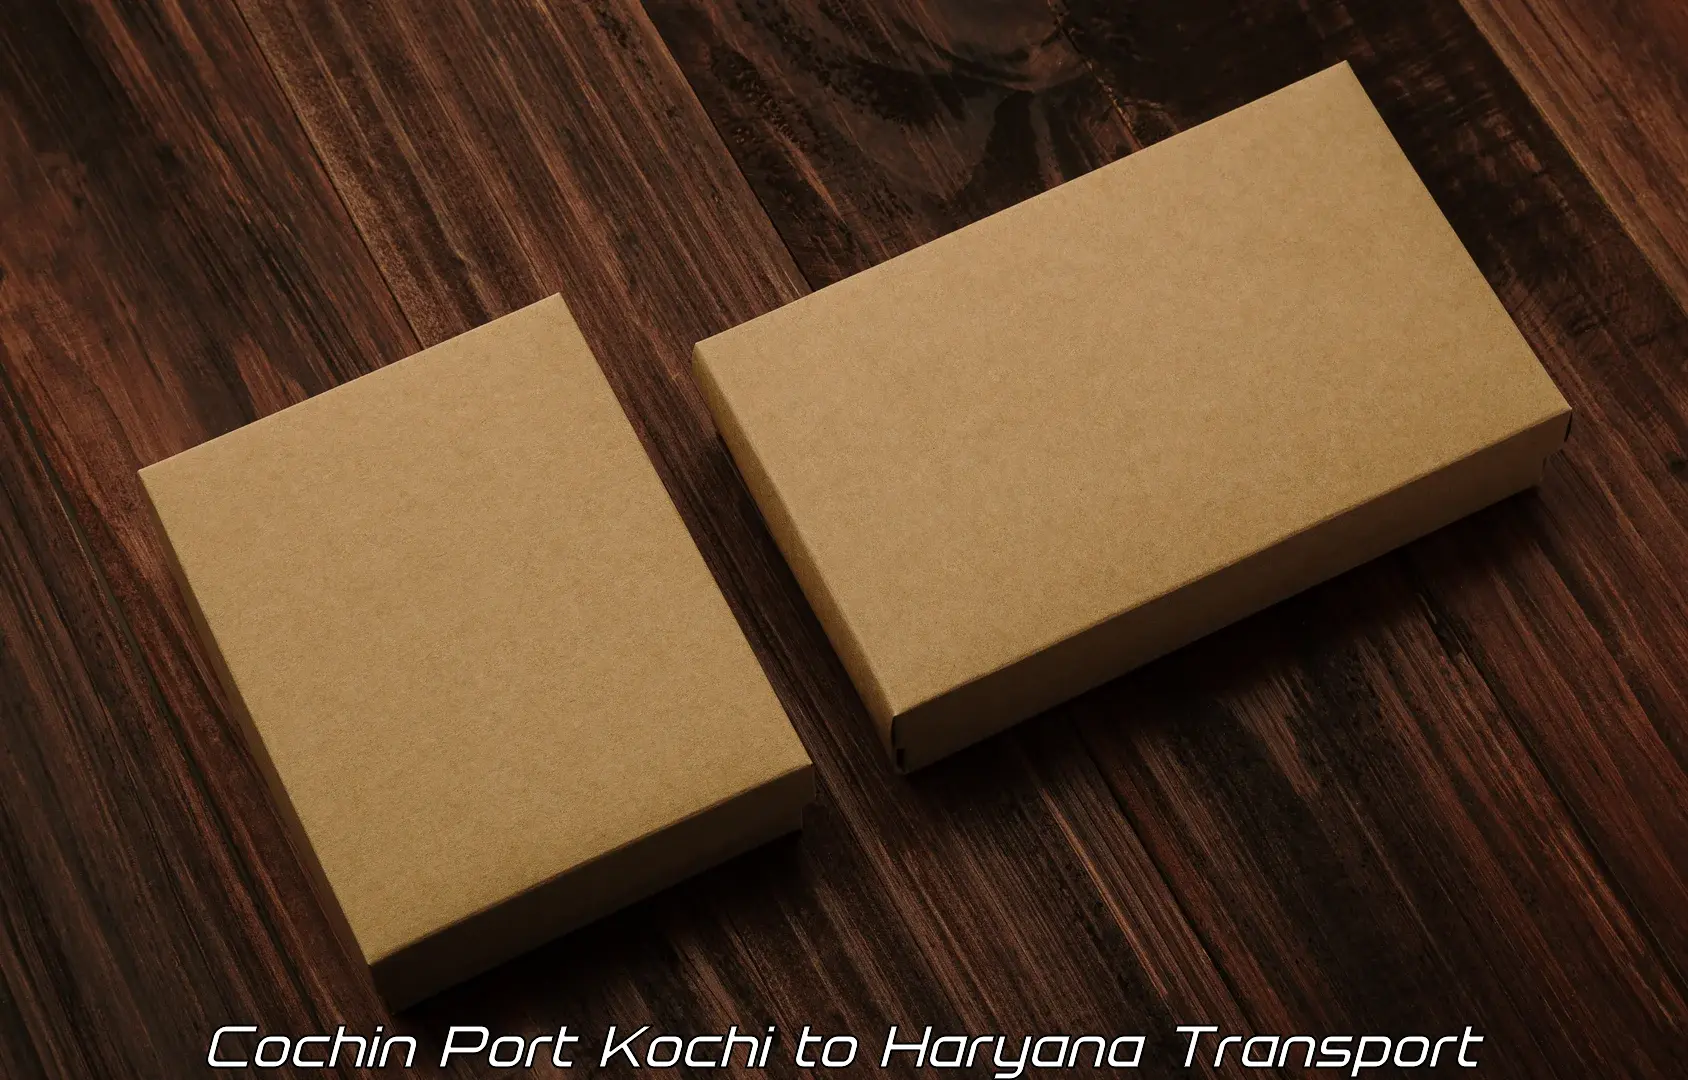 Container transportation services Cochin Port Kochi to NCR Haryana